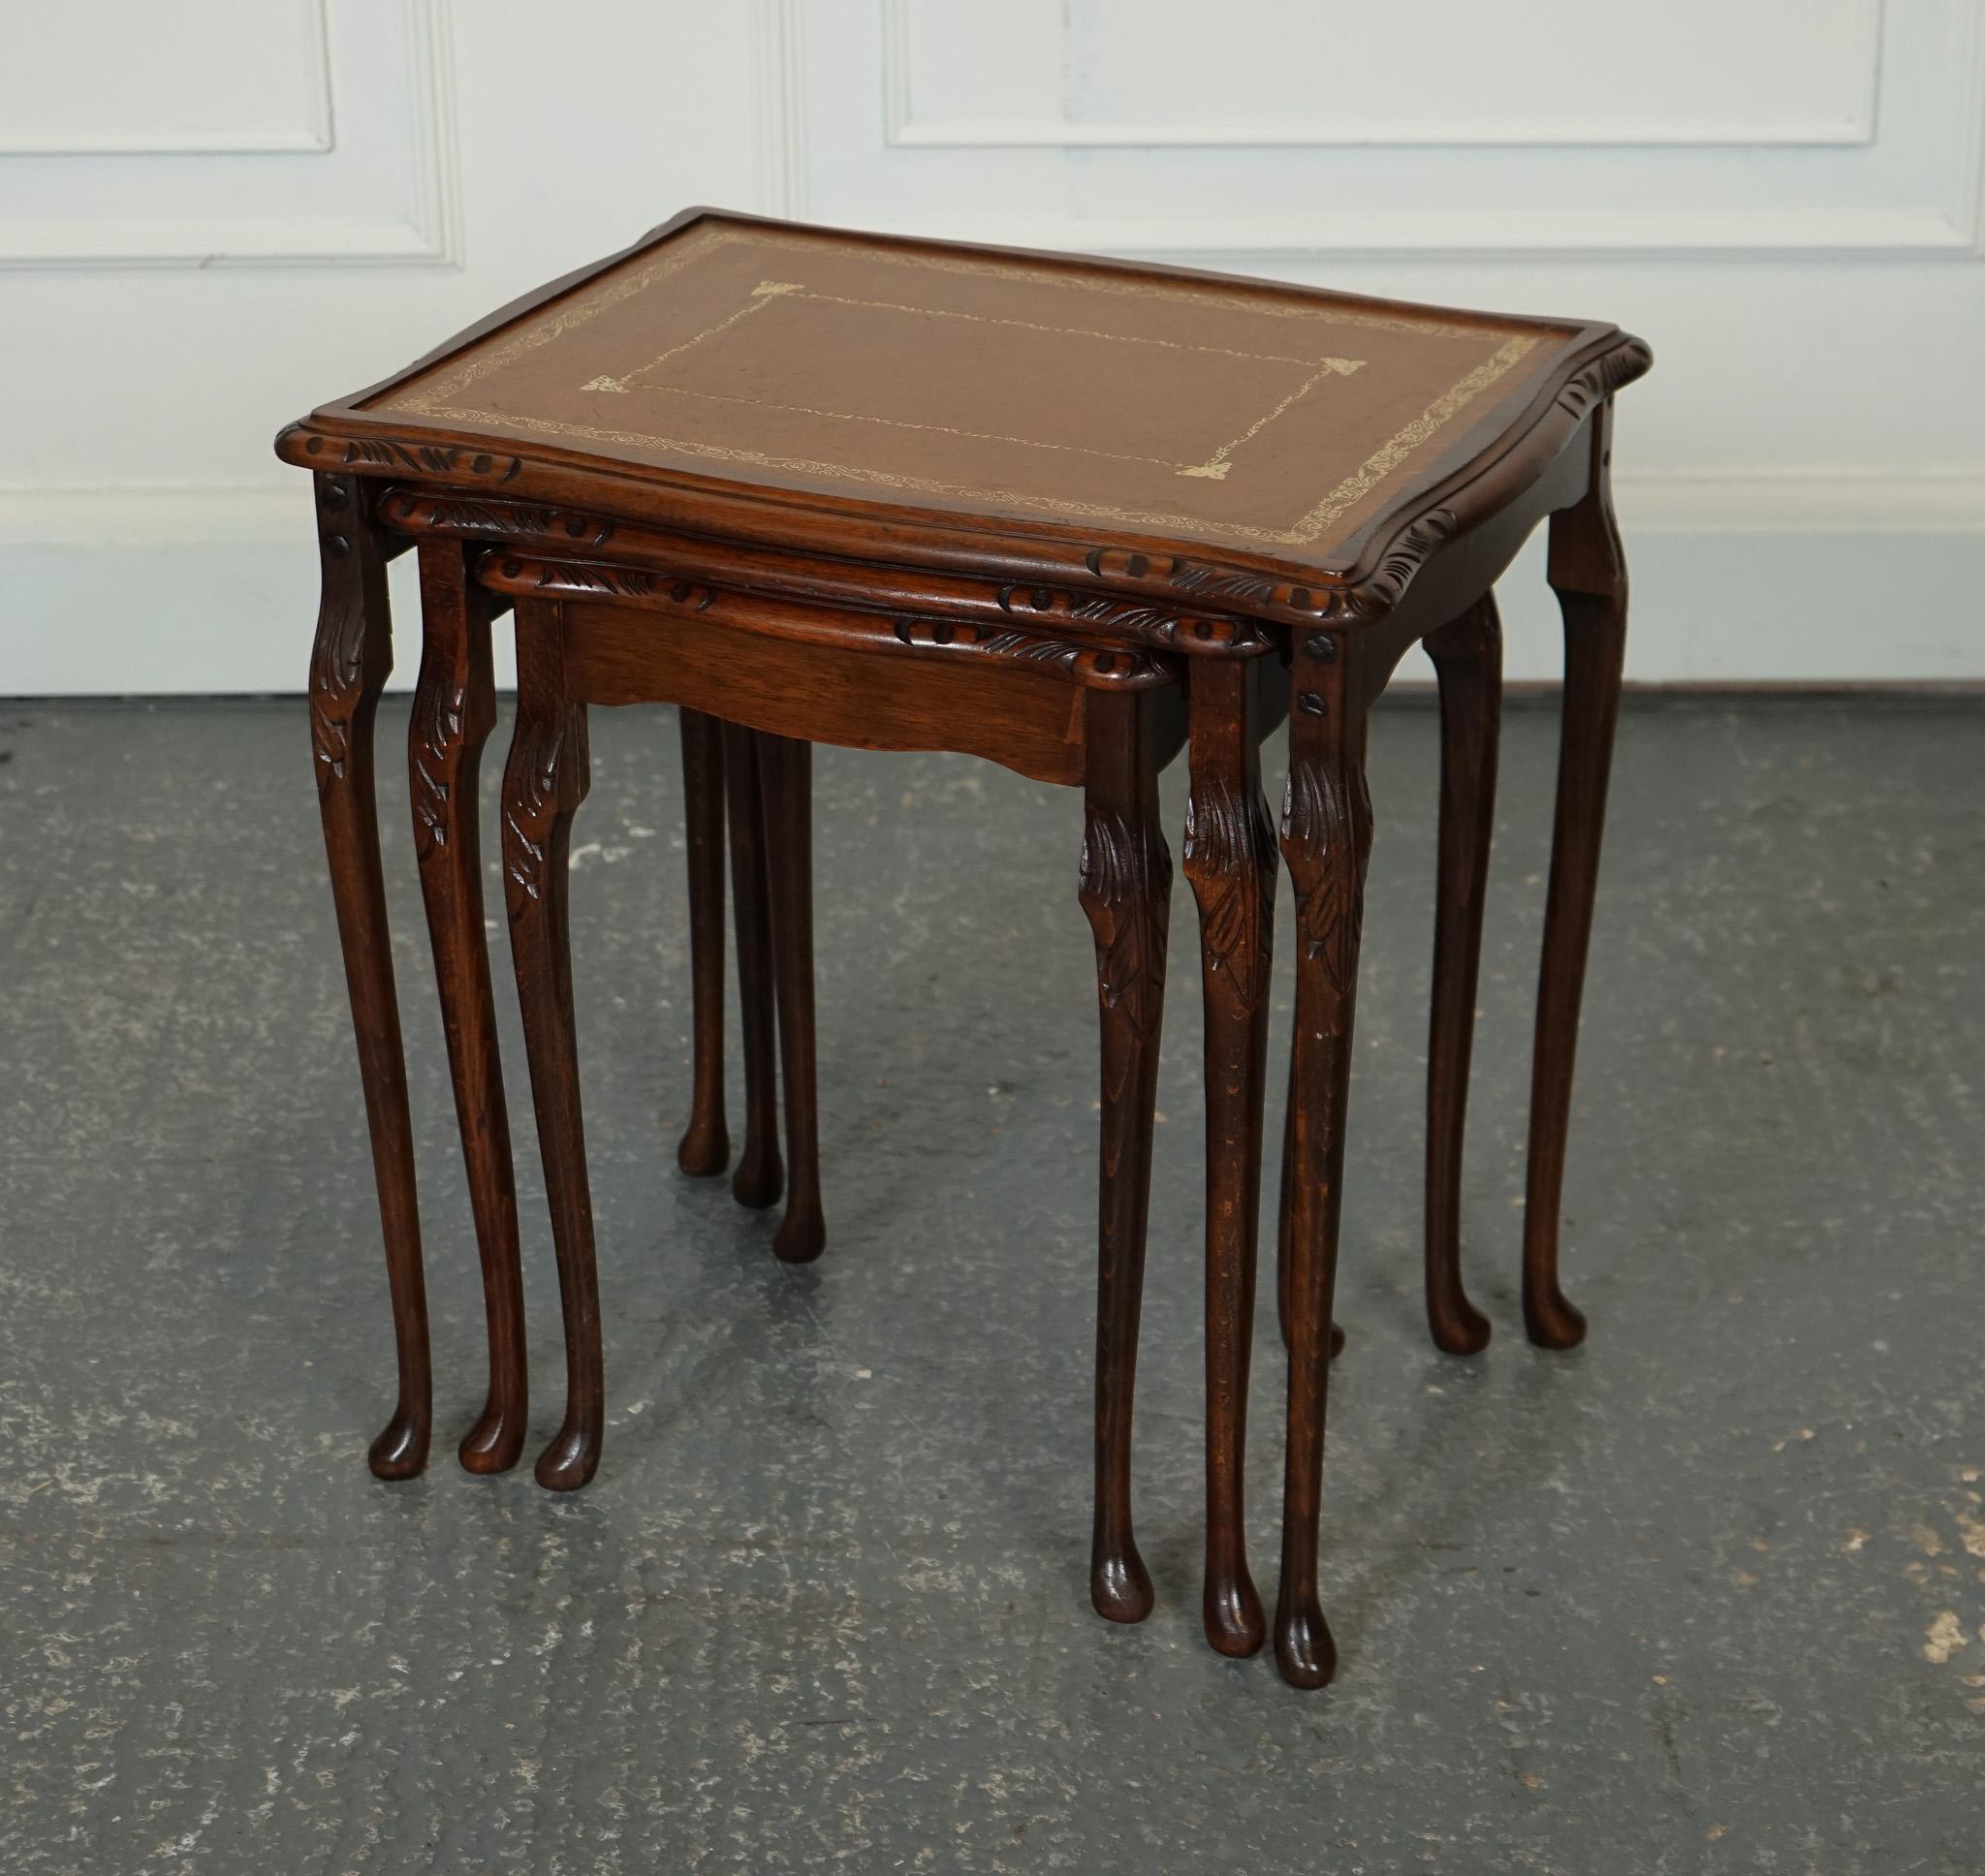 VINTAGE NEST OF TABLES QUEEN ANNE STYLE LEGS WiTH BROWN EMBOSSED LEATHER TOP J1 In Good Condition For Sale In Pulborough, GB